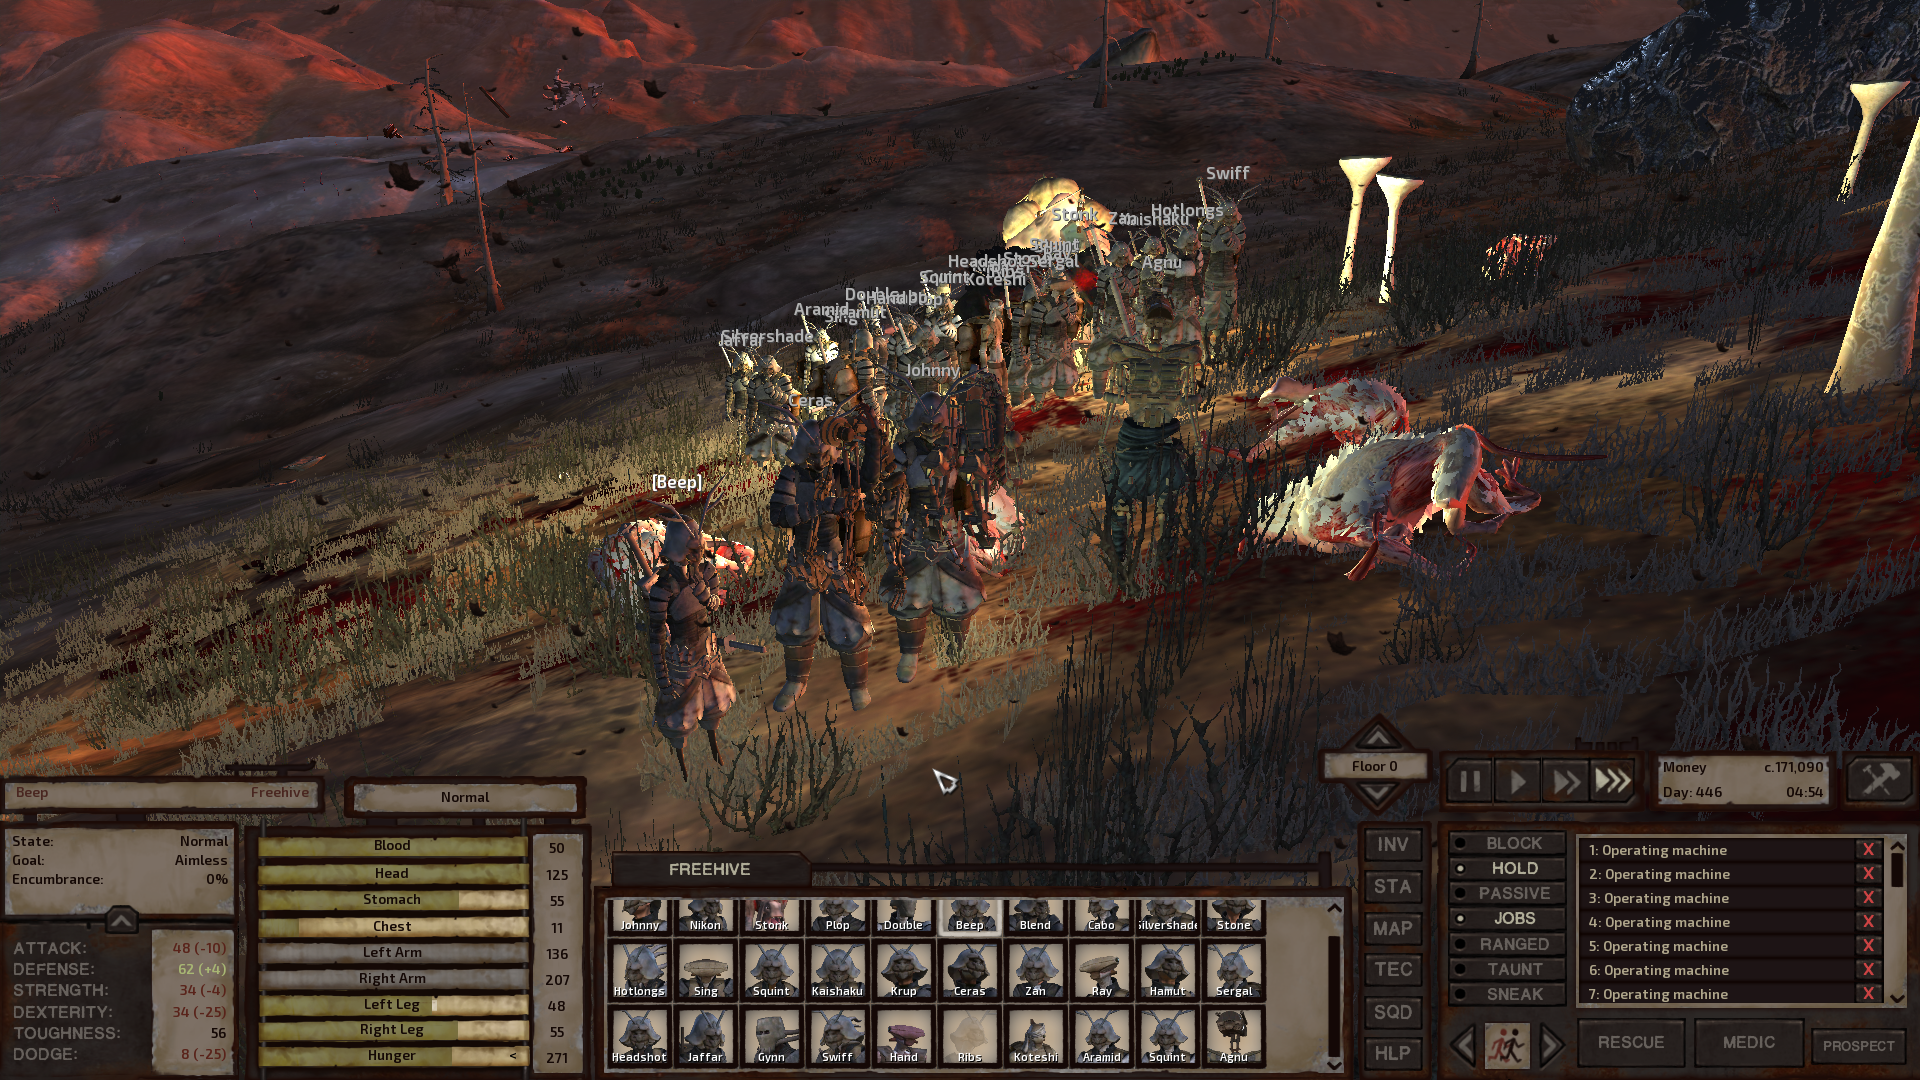 Kenshi agnu in a fight and took down the tower of abuse